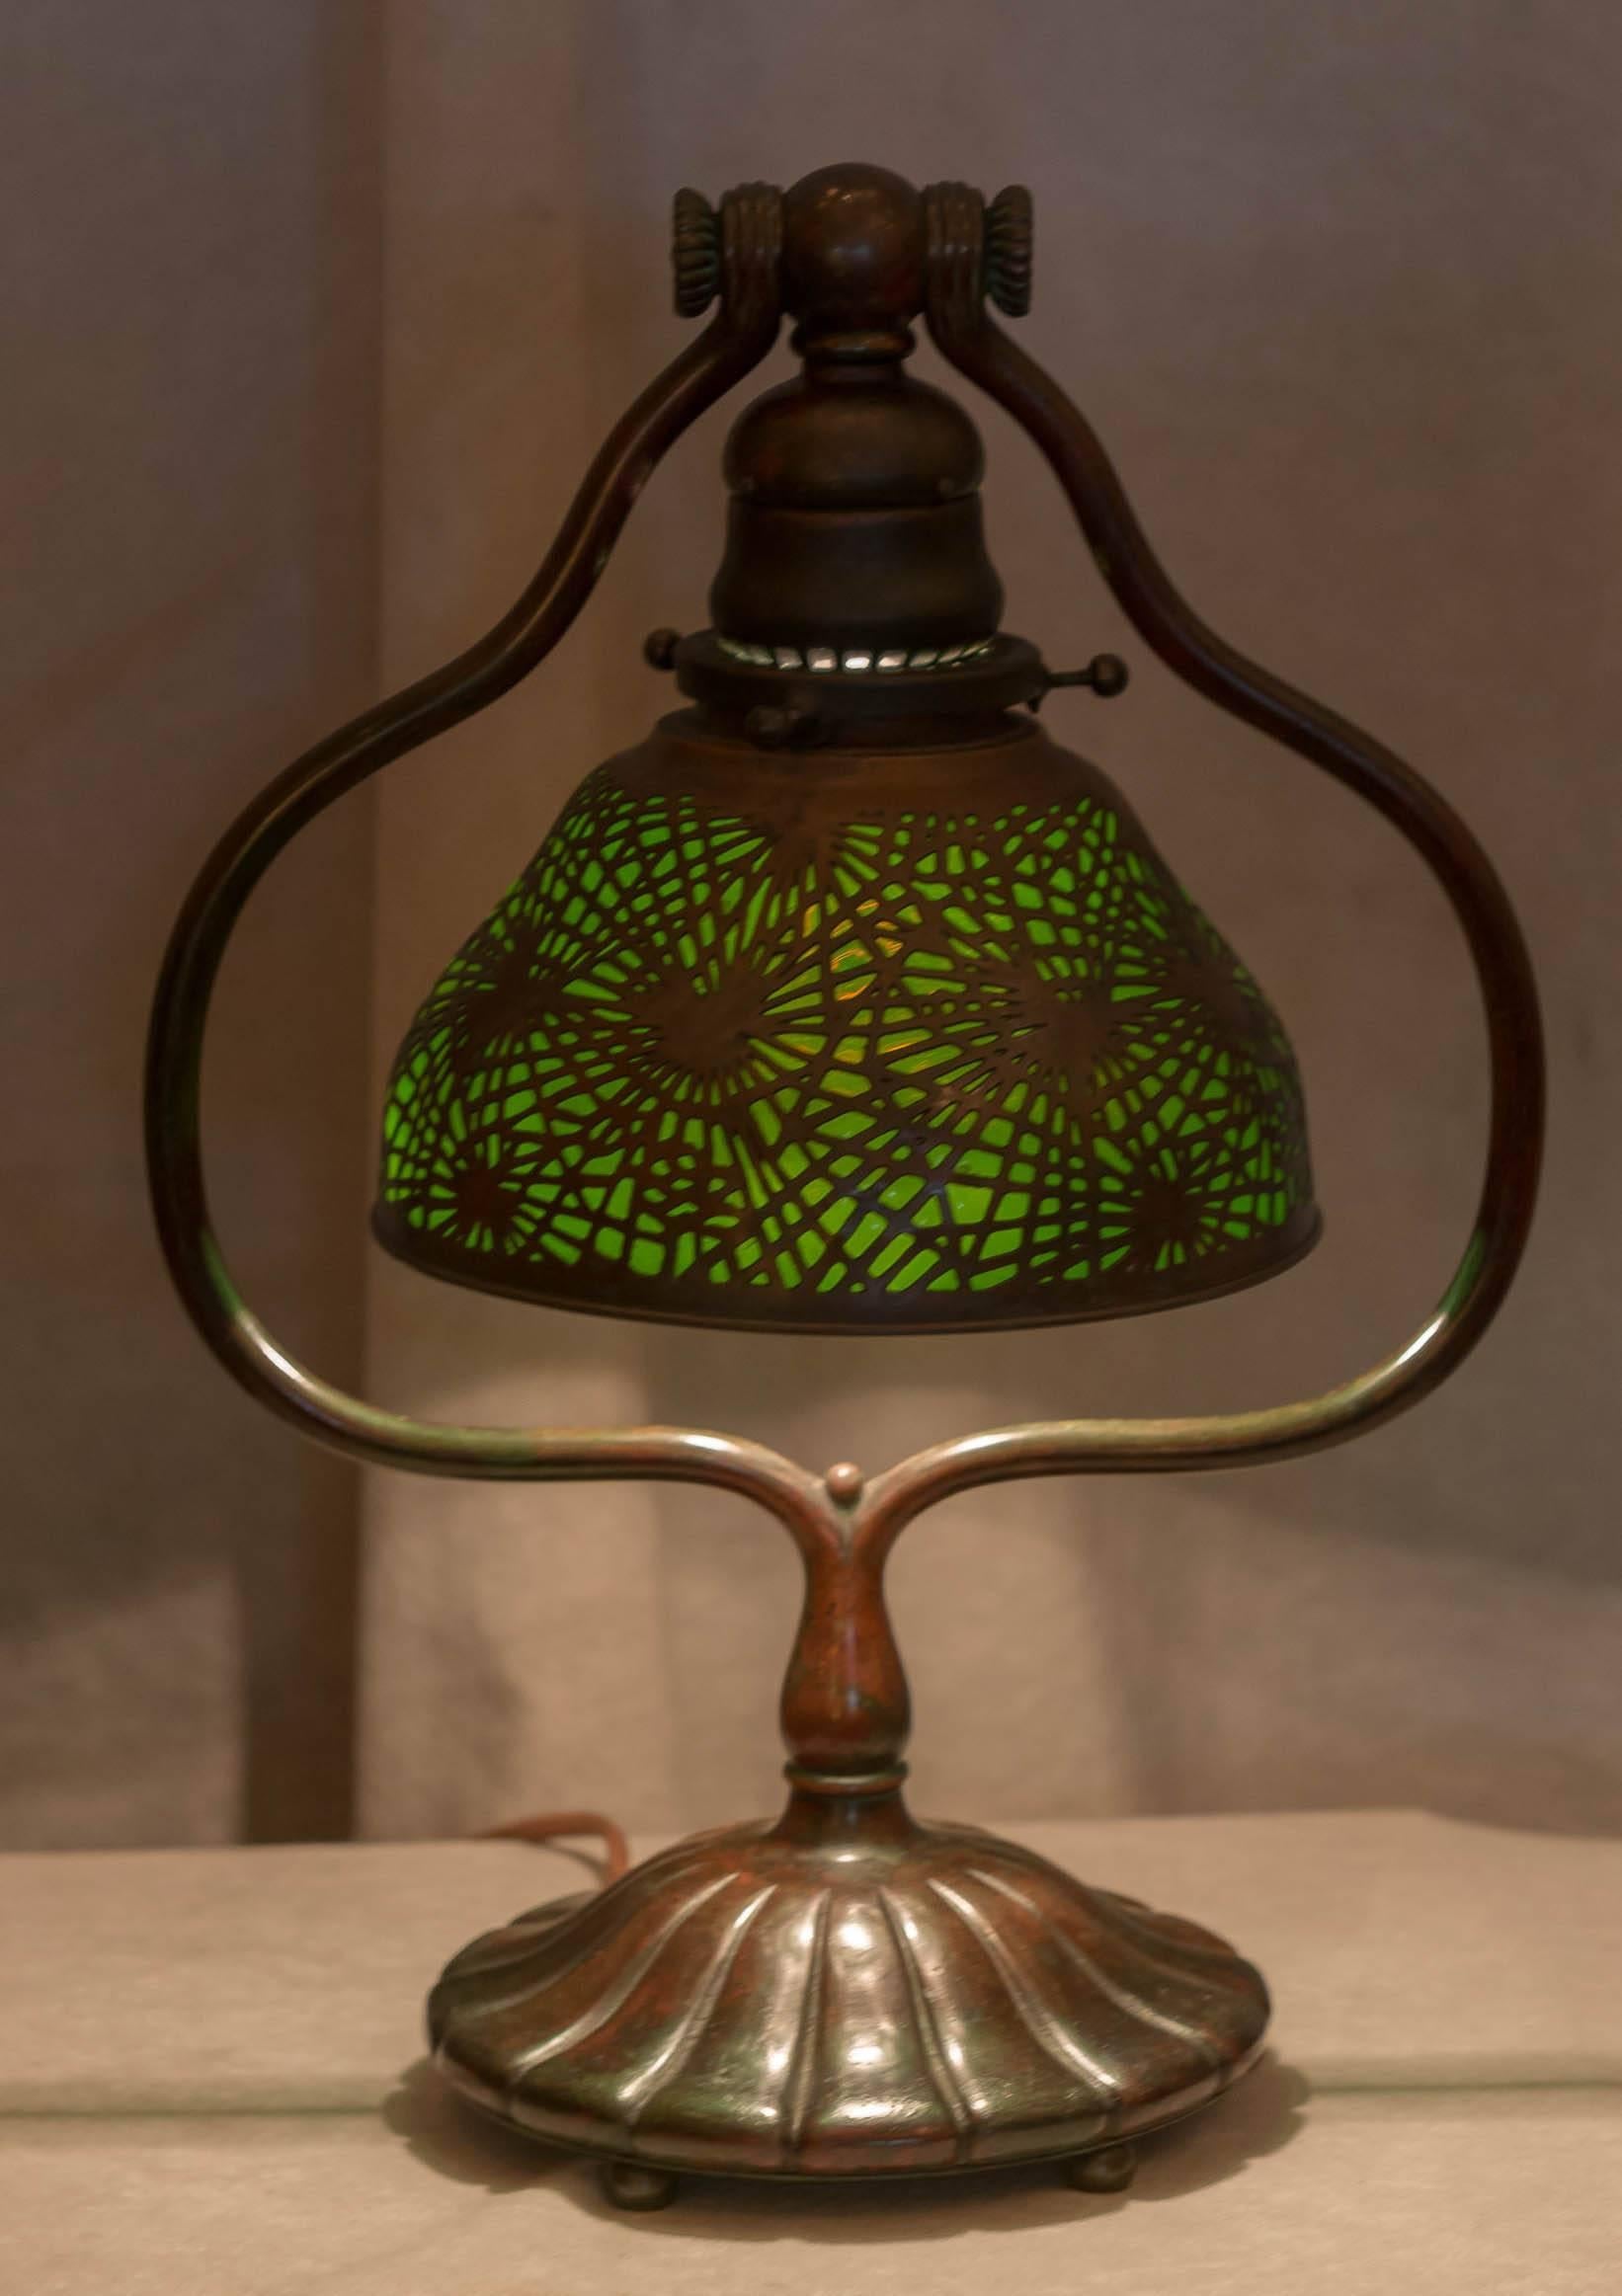 This sweet little lamp is a nice example of the work of the master of lamps, Tiffany Studios. The bronze base has that rich patina, and the shade is green glass encased in the pine needle design.The base is signed. These shades were never signed,